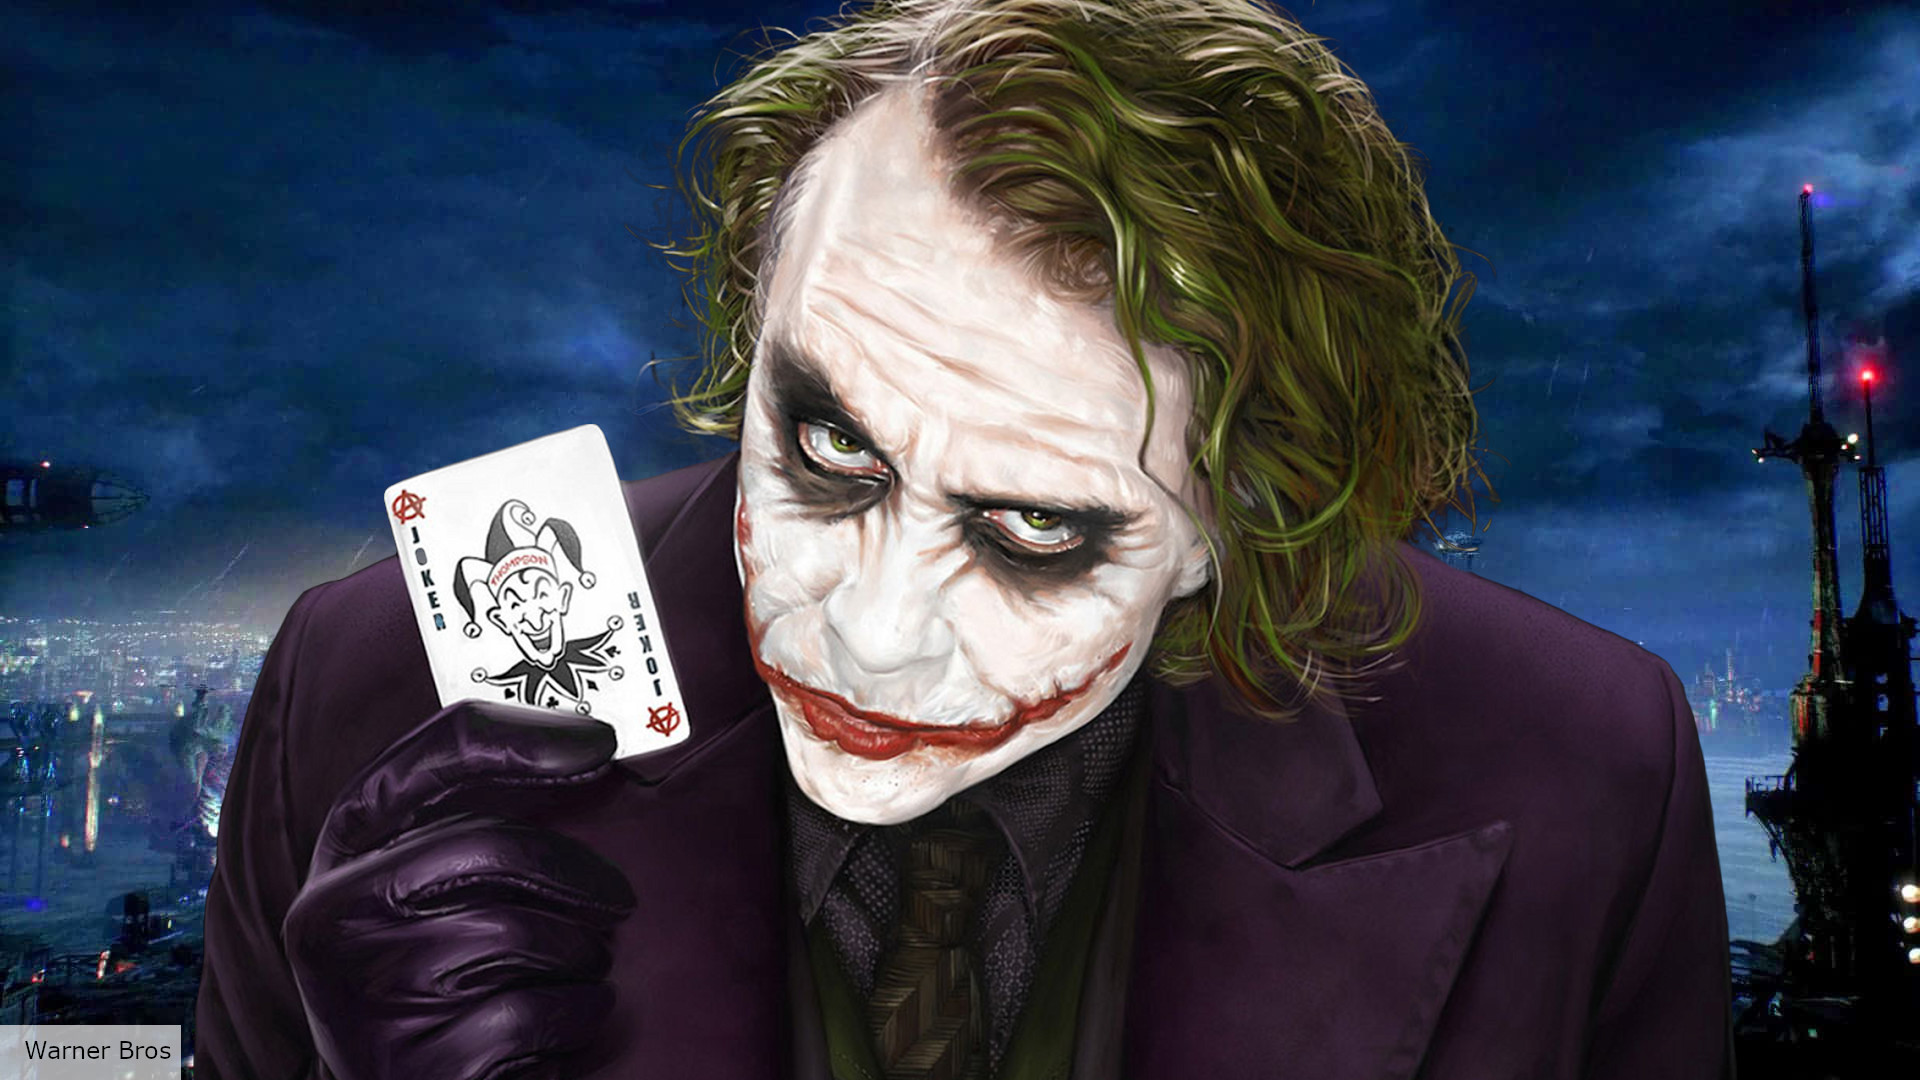 Every Version Of The Joker Ranked From Worst To Best (UPDATED) 